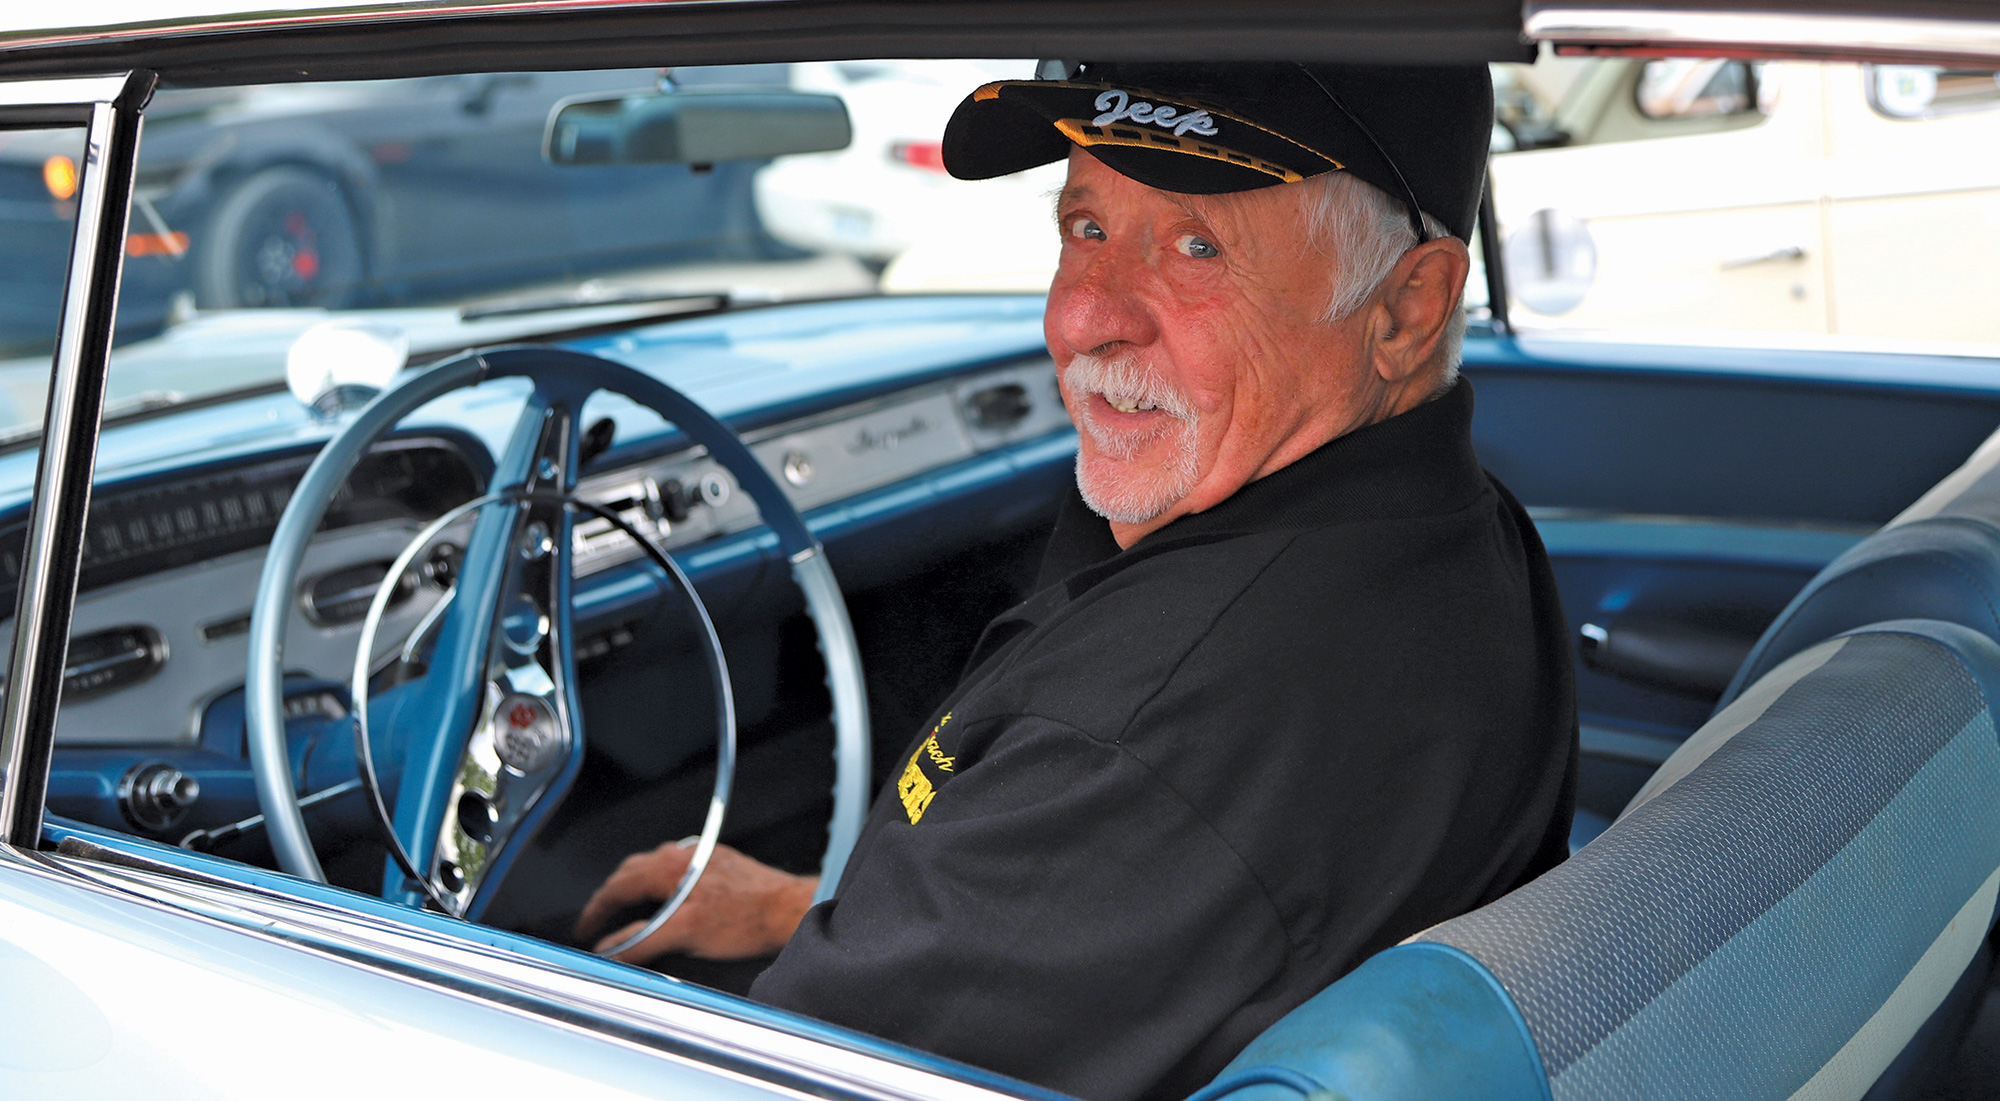 Ron Decoste behind the wheel of his ‘58 Chevy Impala.